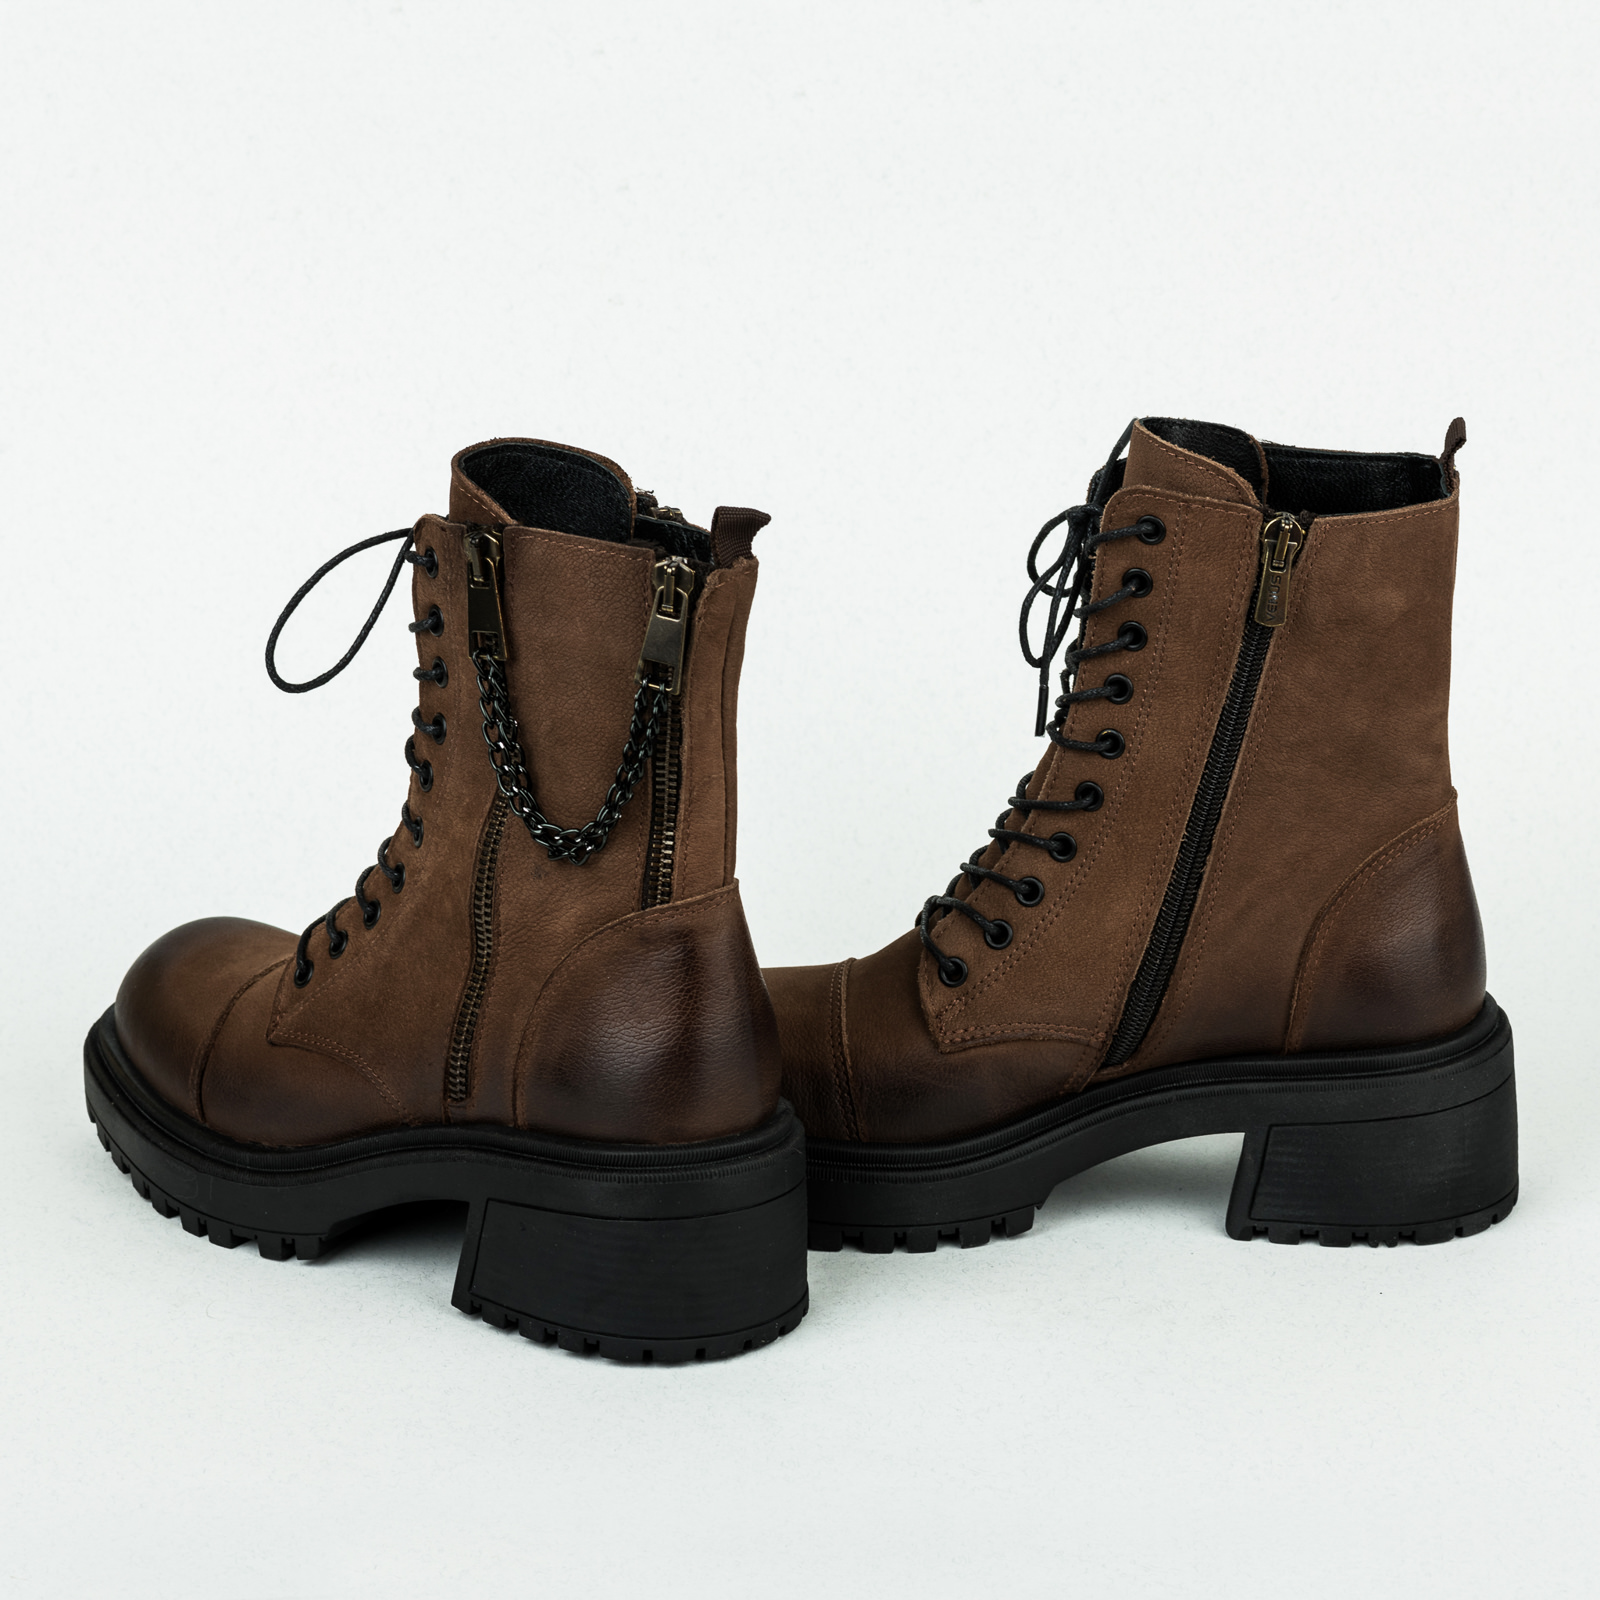 Leather ankle boots B089 - BROWN